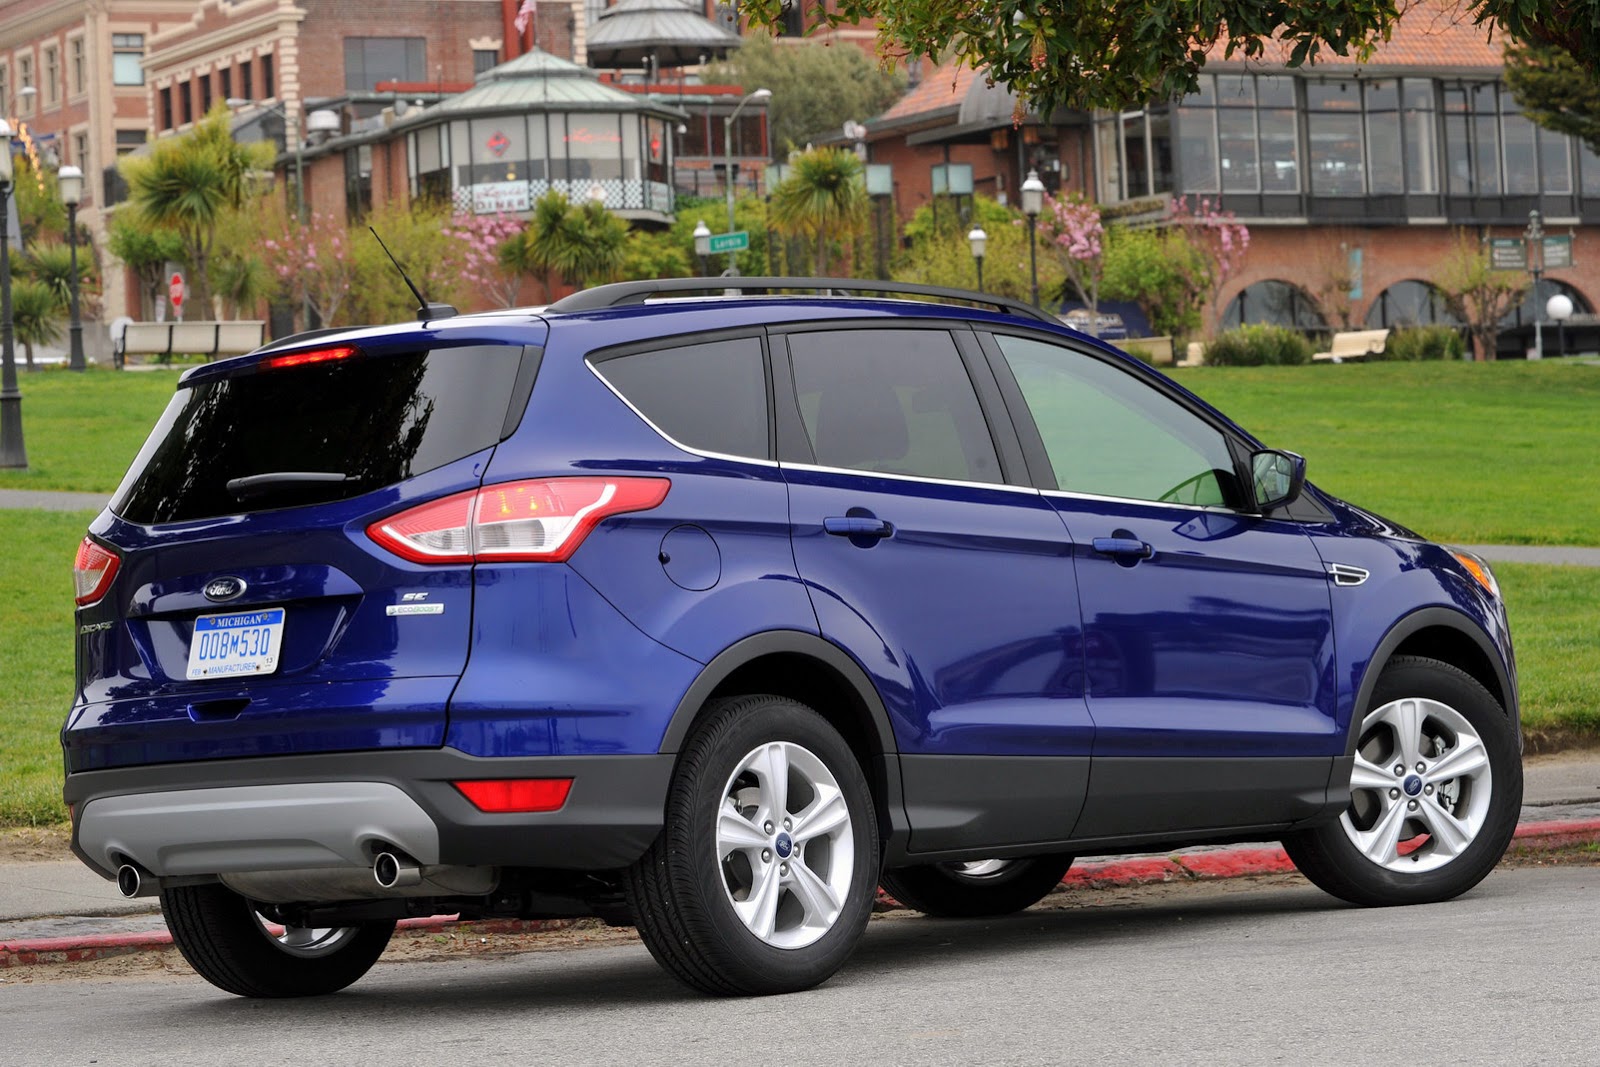 Ford Recalls New Escape for the 11th Time, Focus ST Also Affected